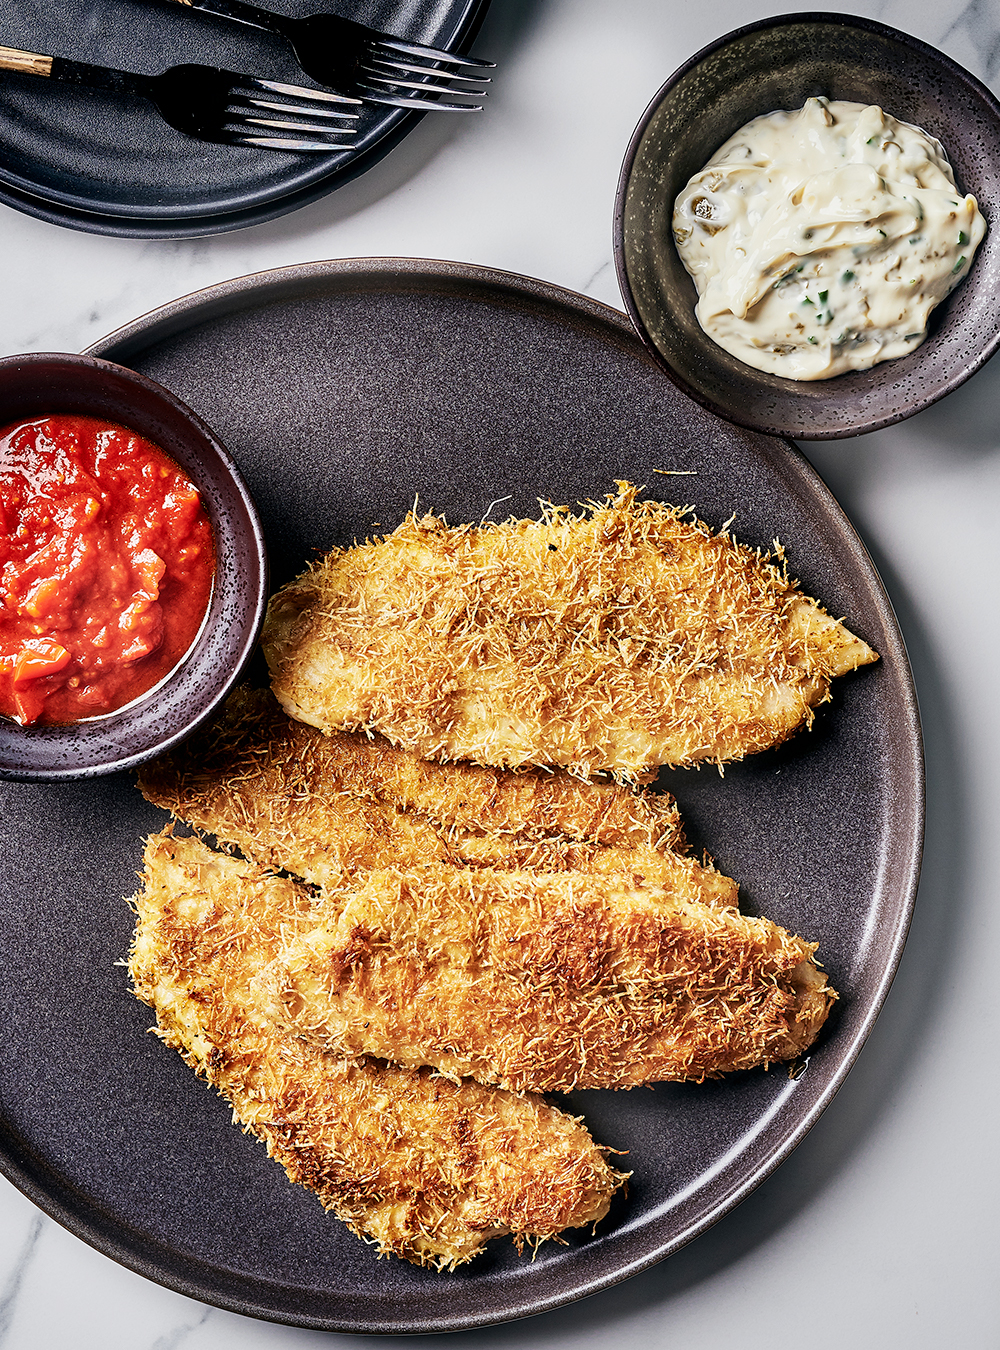 Crispy Fish Fillets with Shredded Wheat